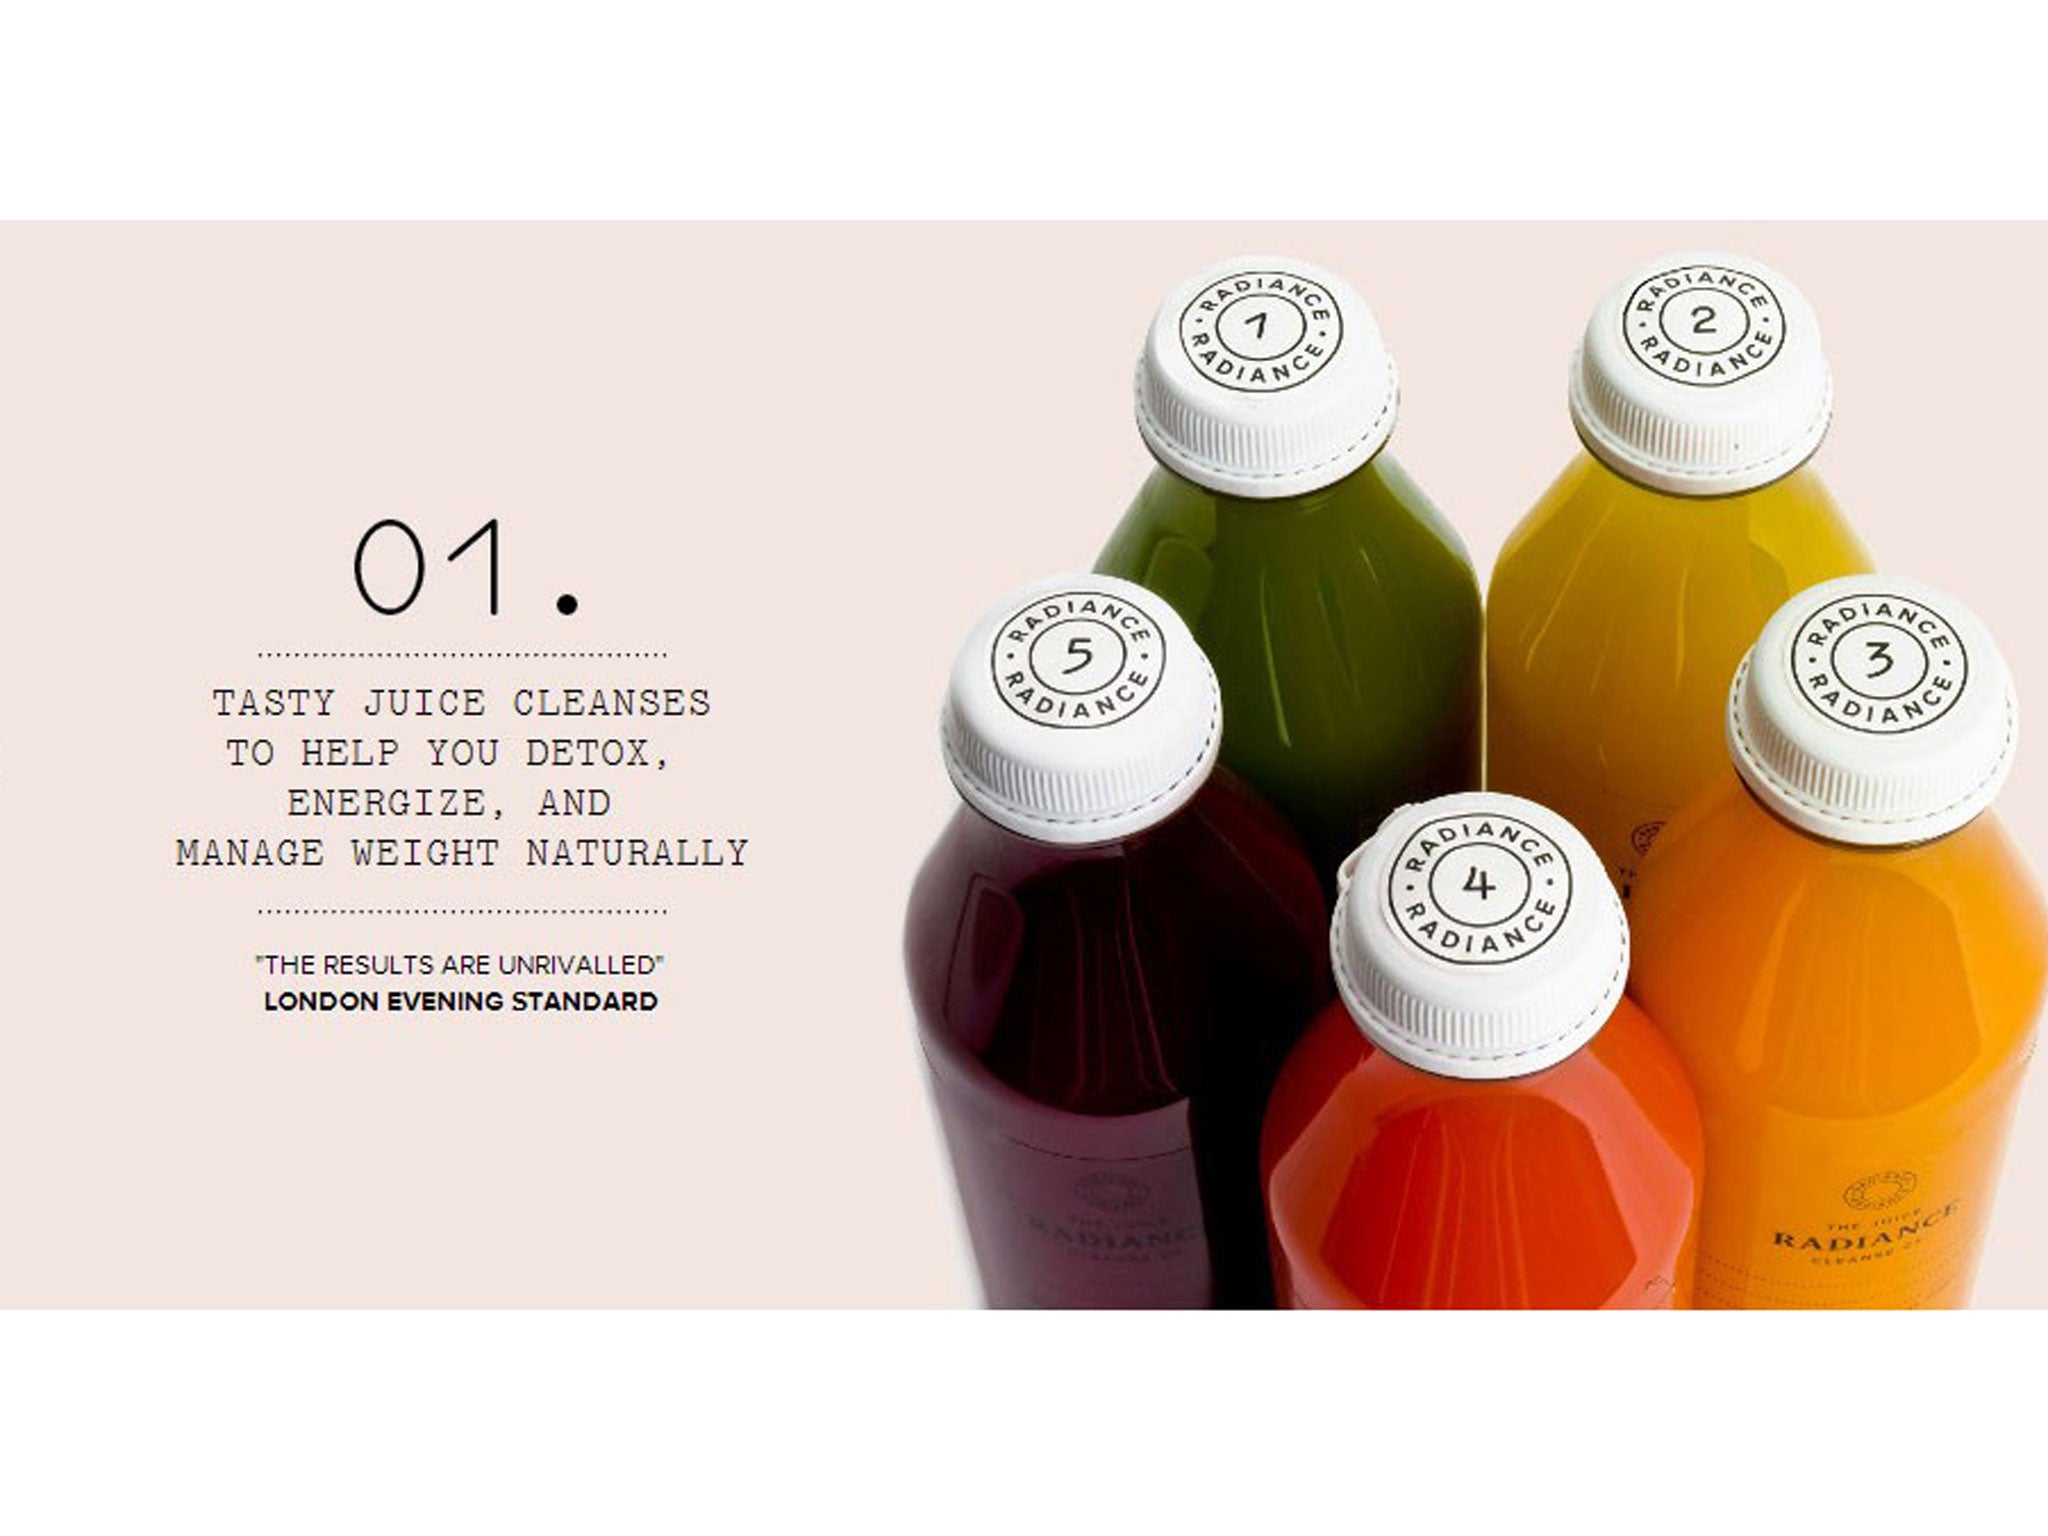 Food for thought: The Radiance Cleanse website